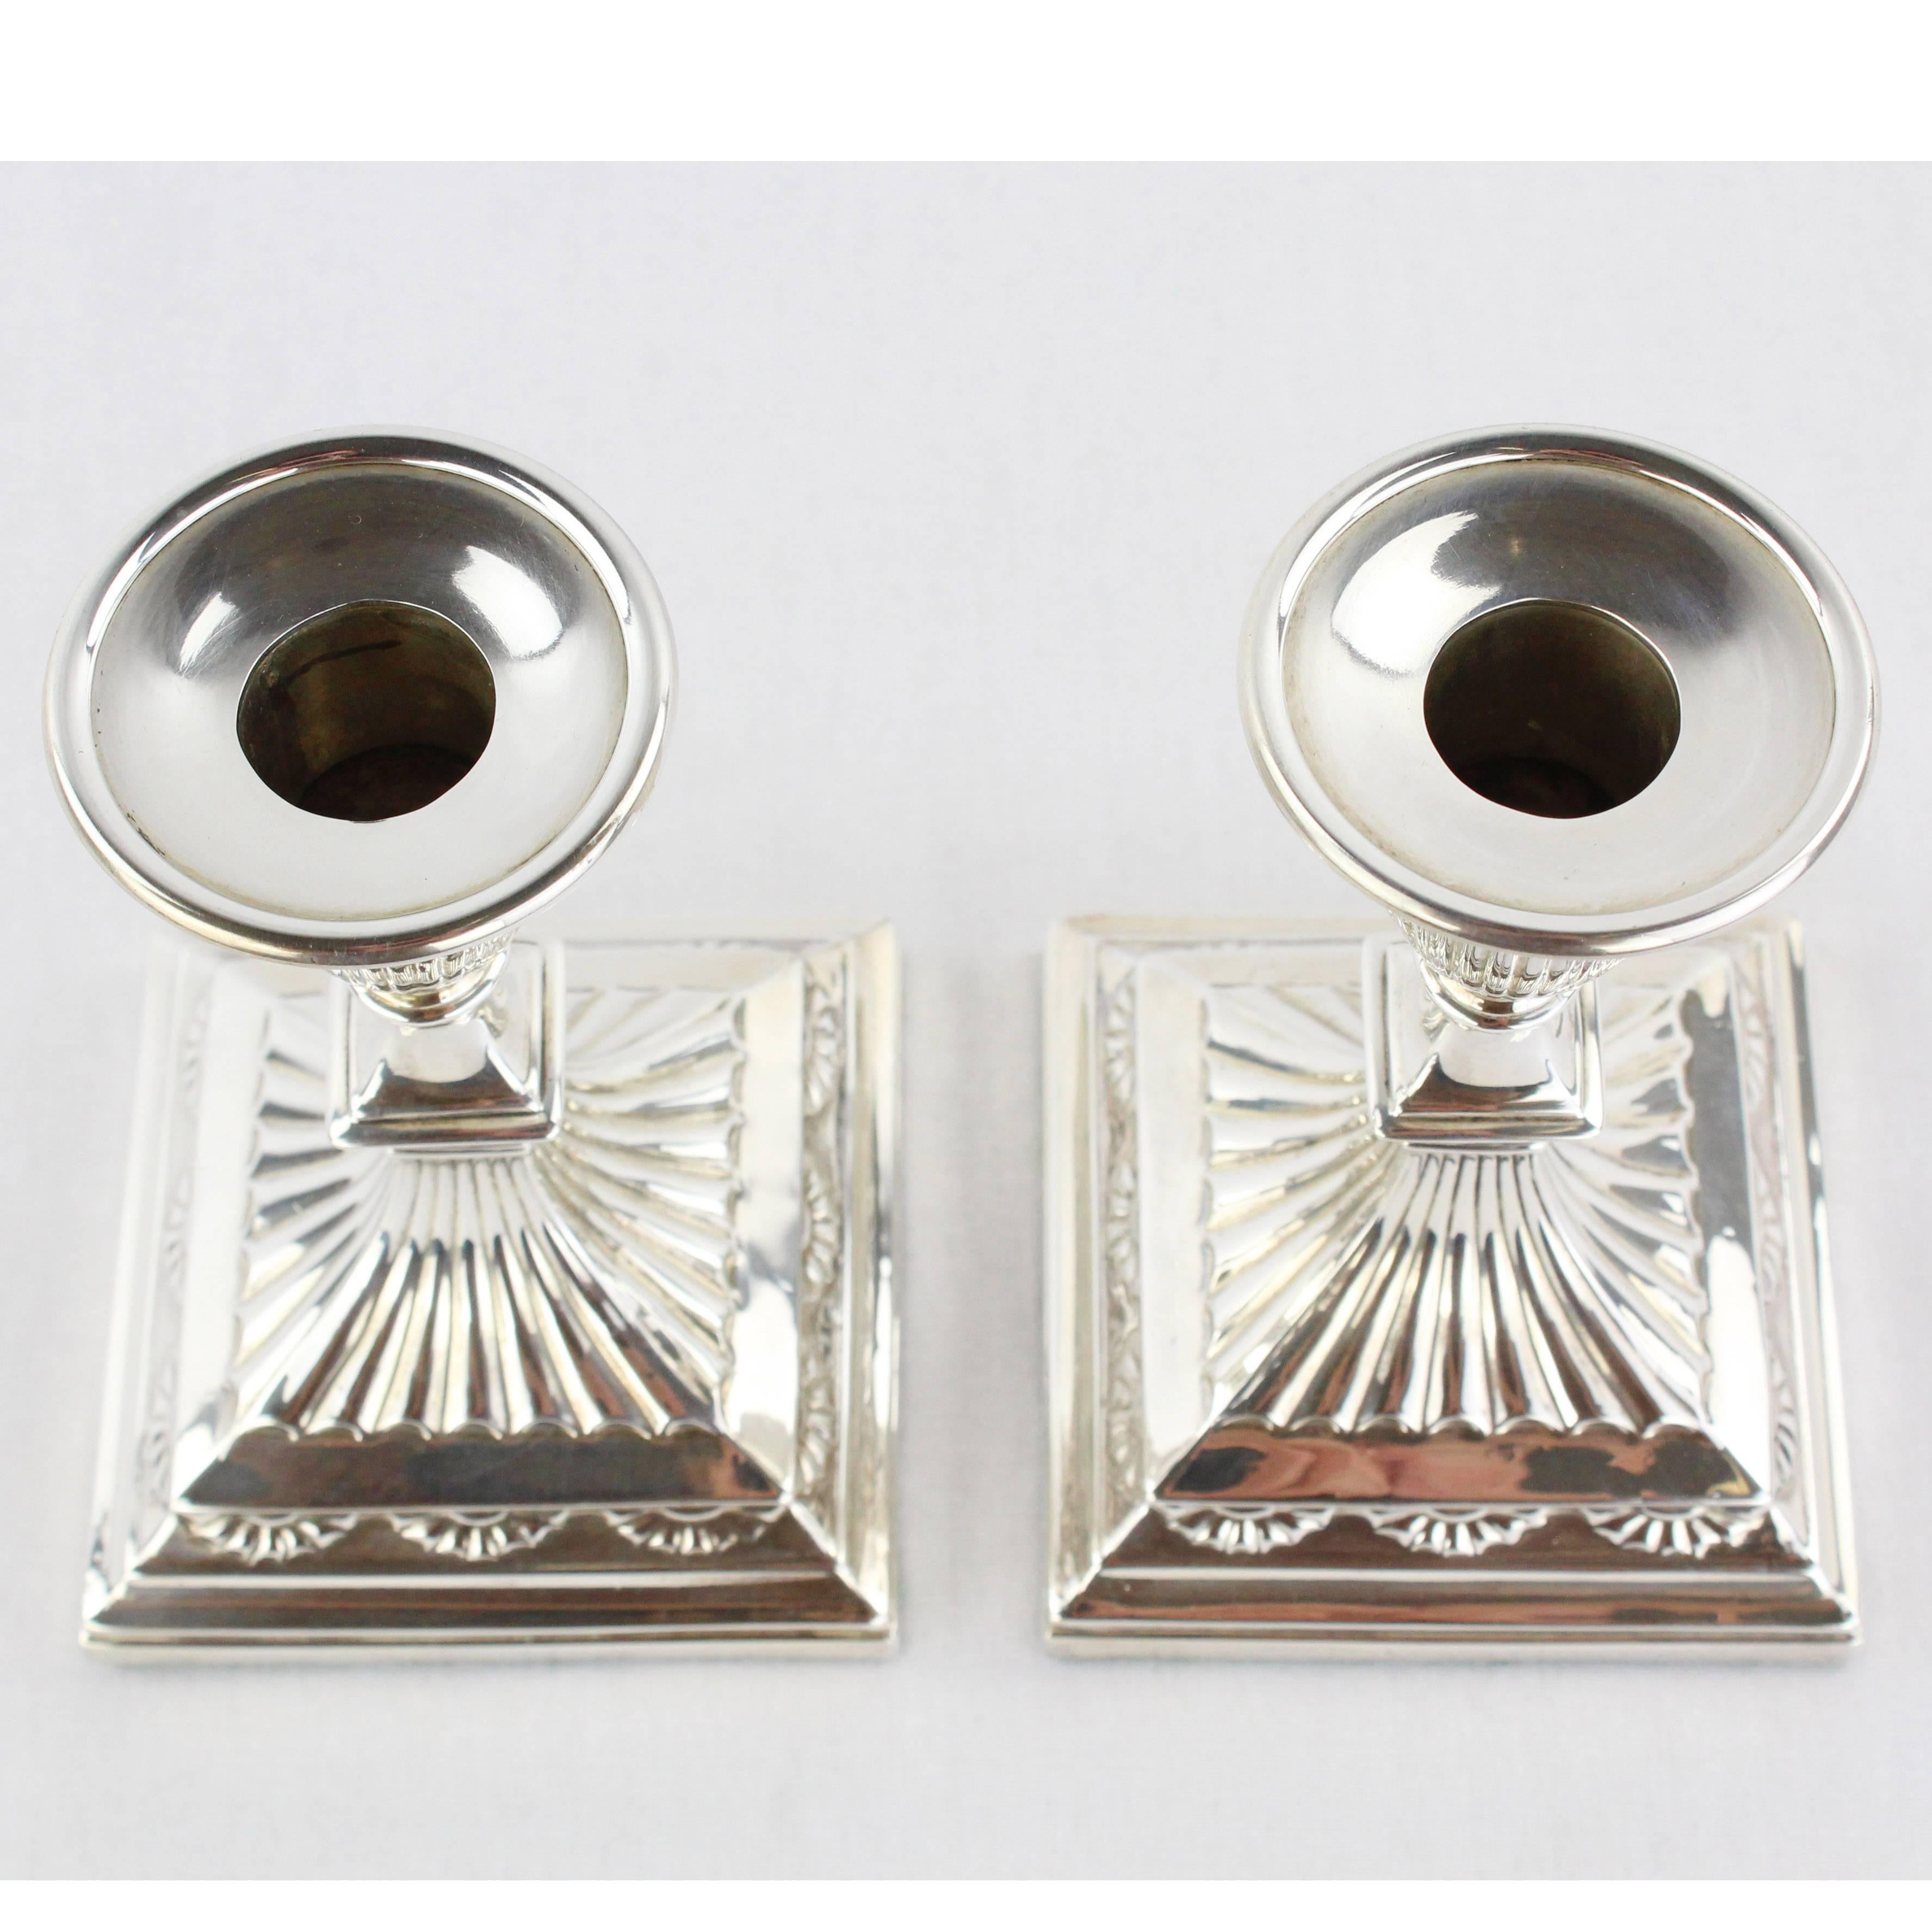 925 sterling silver
Sheffield 1891, hallmarked
Round spout form
Square foot
Measures: Height 13 cm, foot 9 cm x 9 cm

Delivery can be made to your door within 7 days worldwide. We already delivered to Asia, US and a lot of European countries.